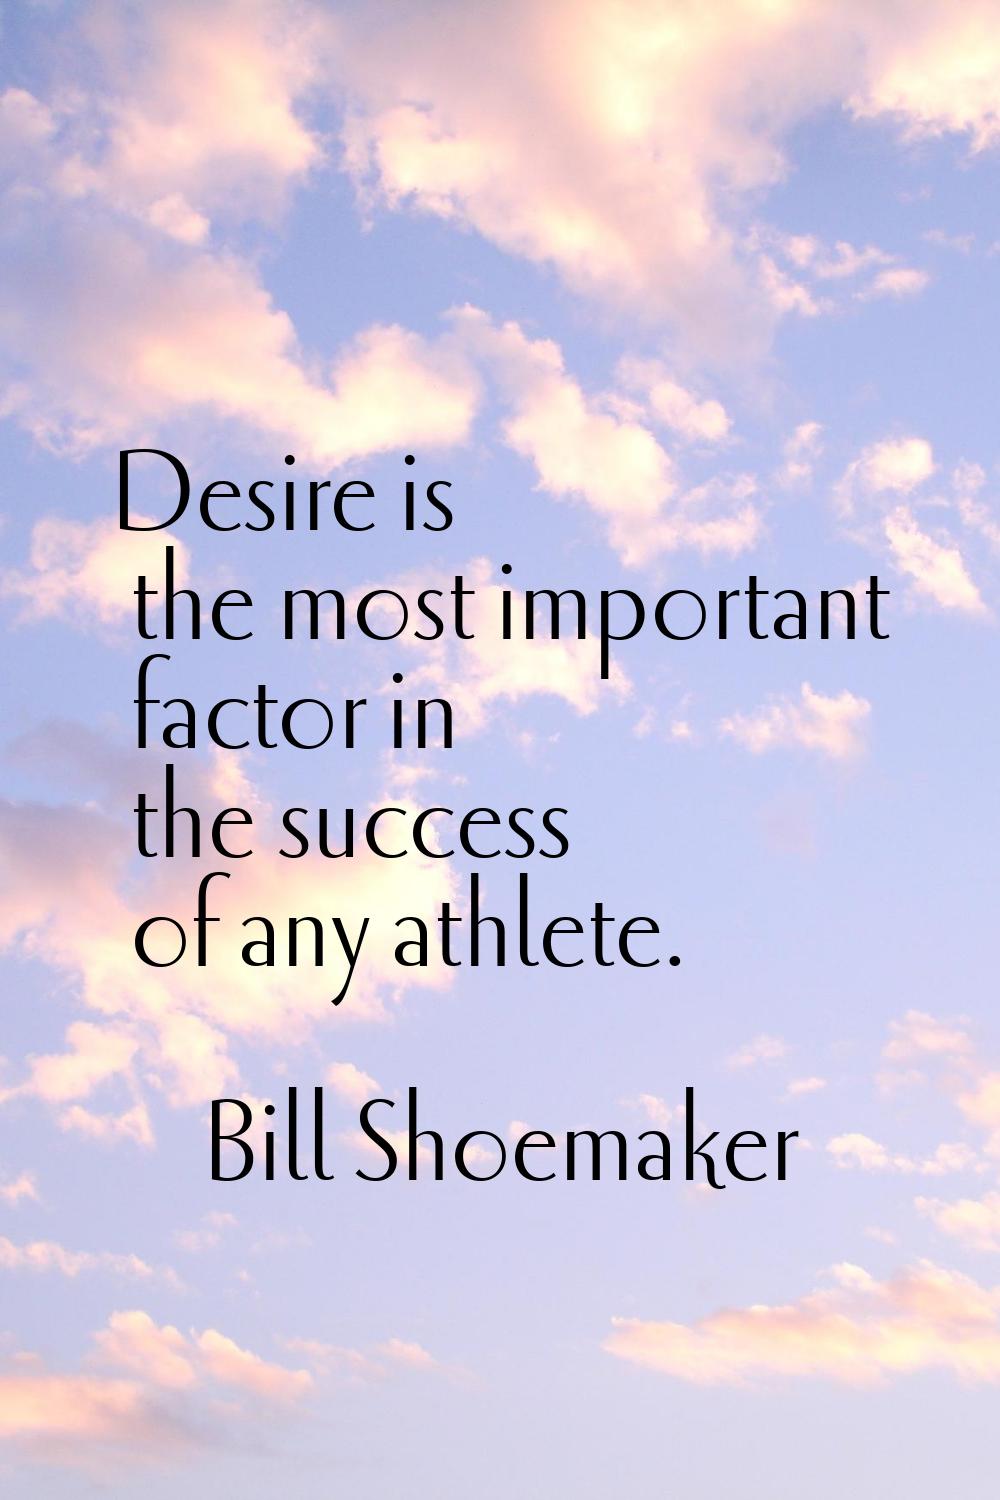 Desire is the most important factor in the success of any athlete.